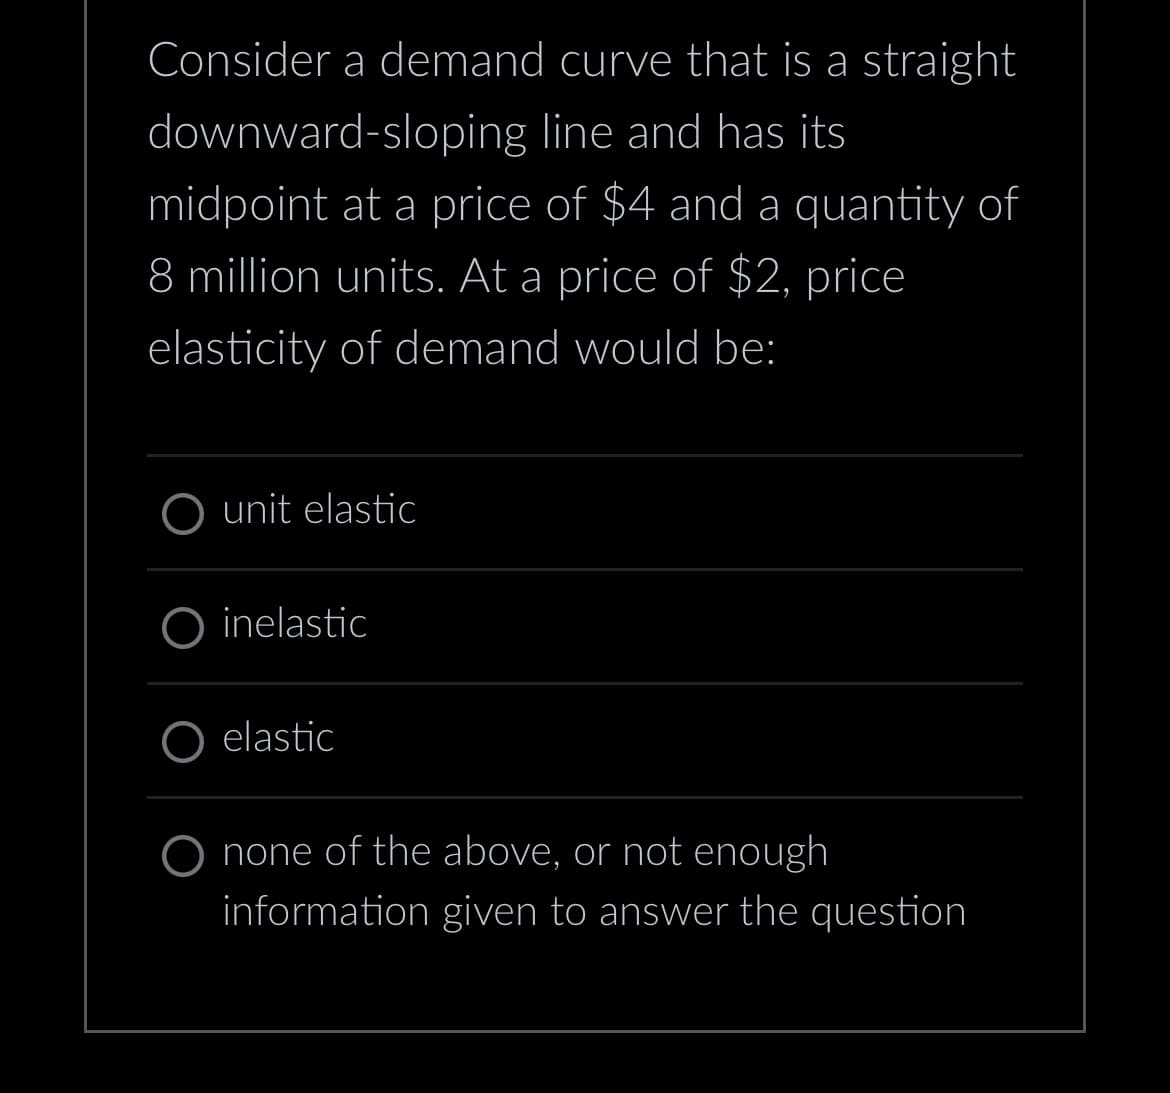 Consider a demand curve that is a straight
downward-sloping line and has its
midpoint at a price of $4 and a quantity of
8 million units. At a price of $2, price
elasticity of demand would be:
O unit elastic
O inelastic
elastic
O none of the above, or not enough
information given to answer the question